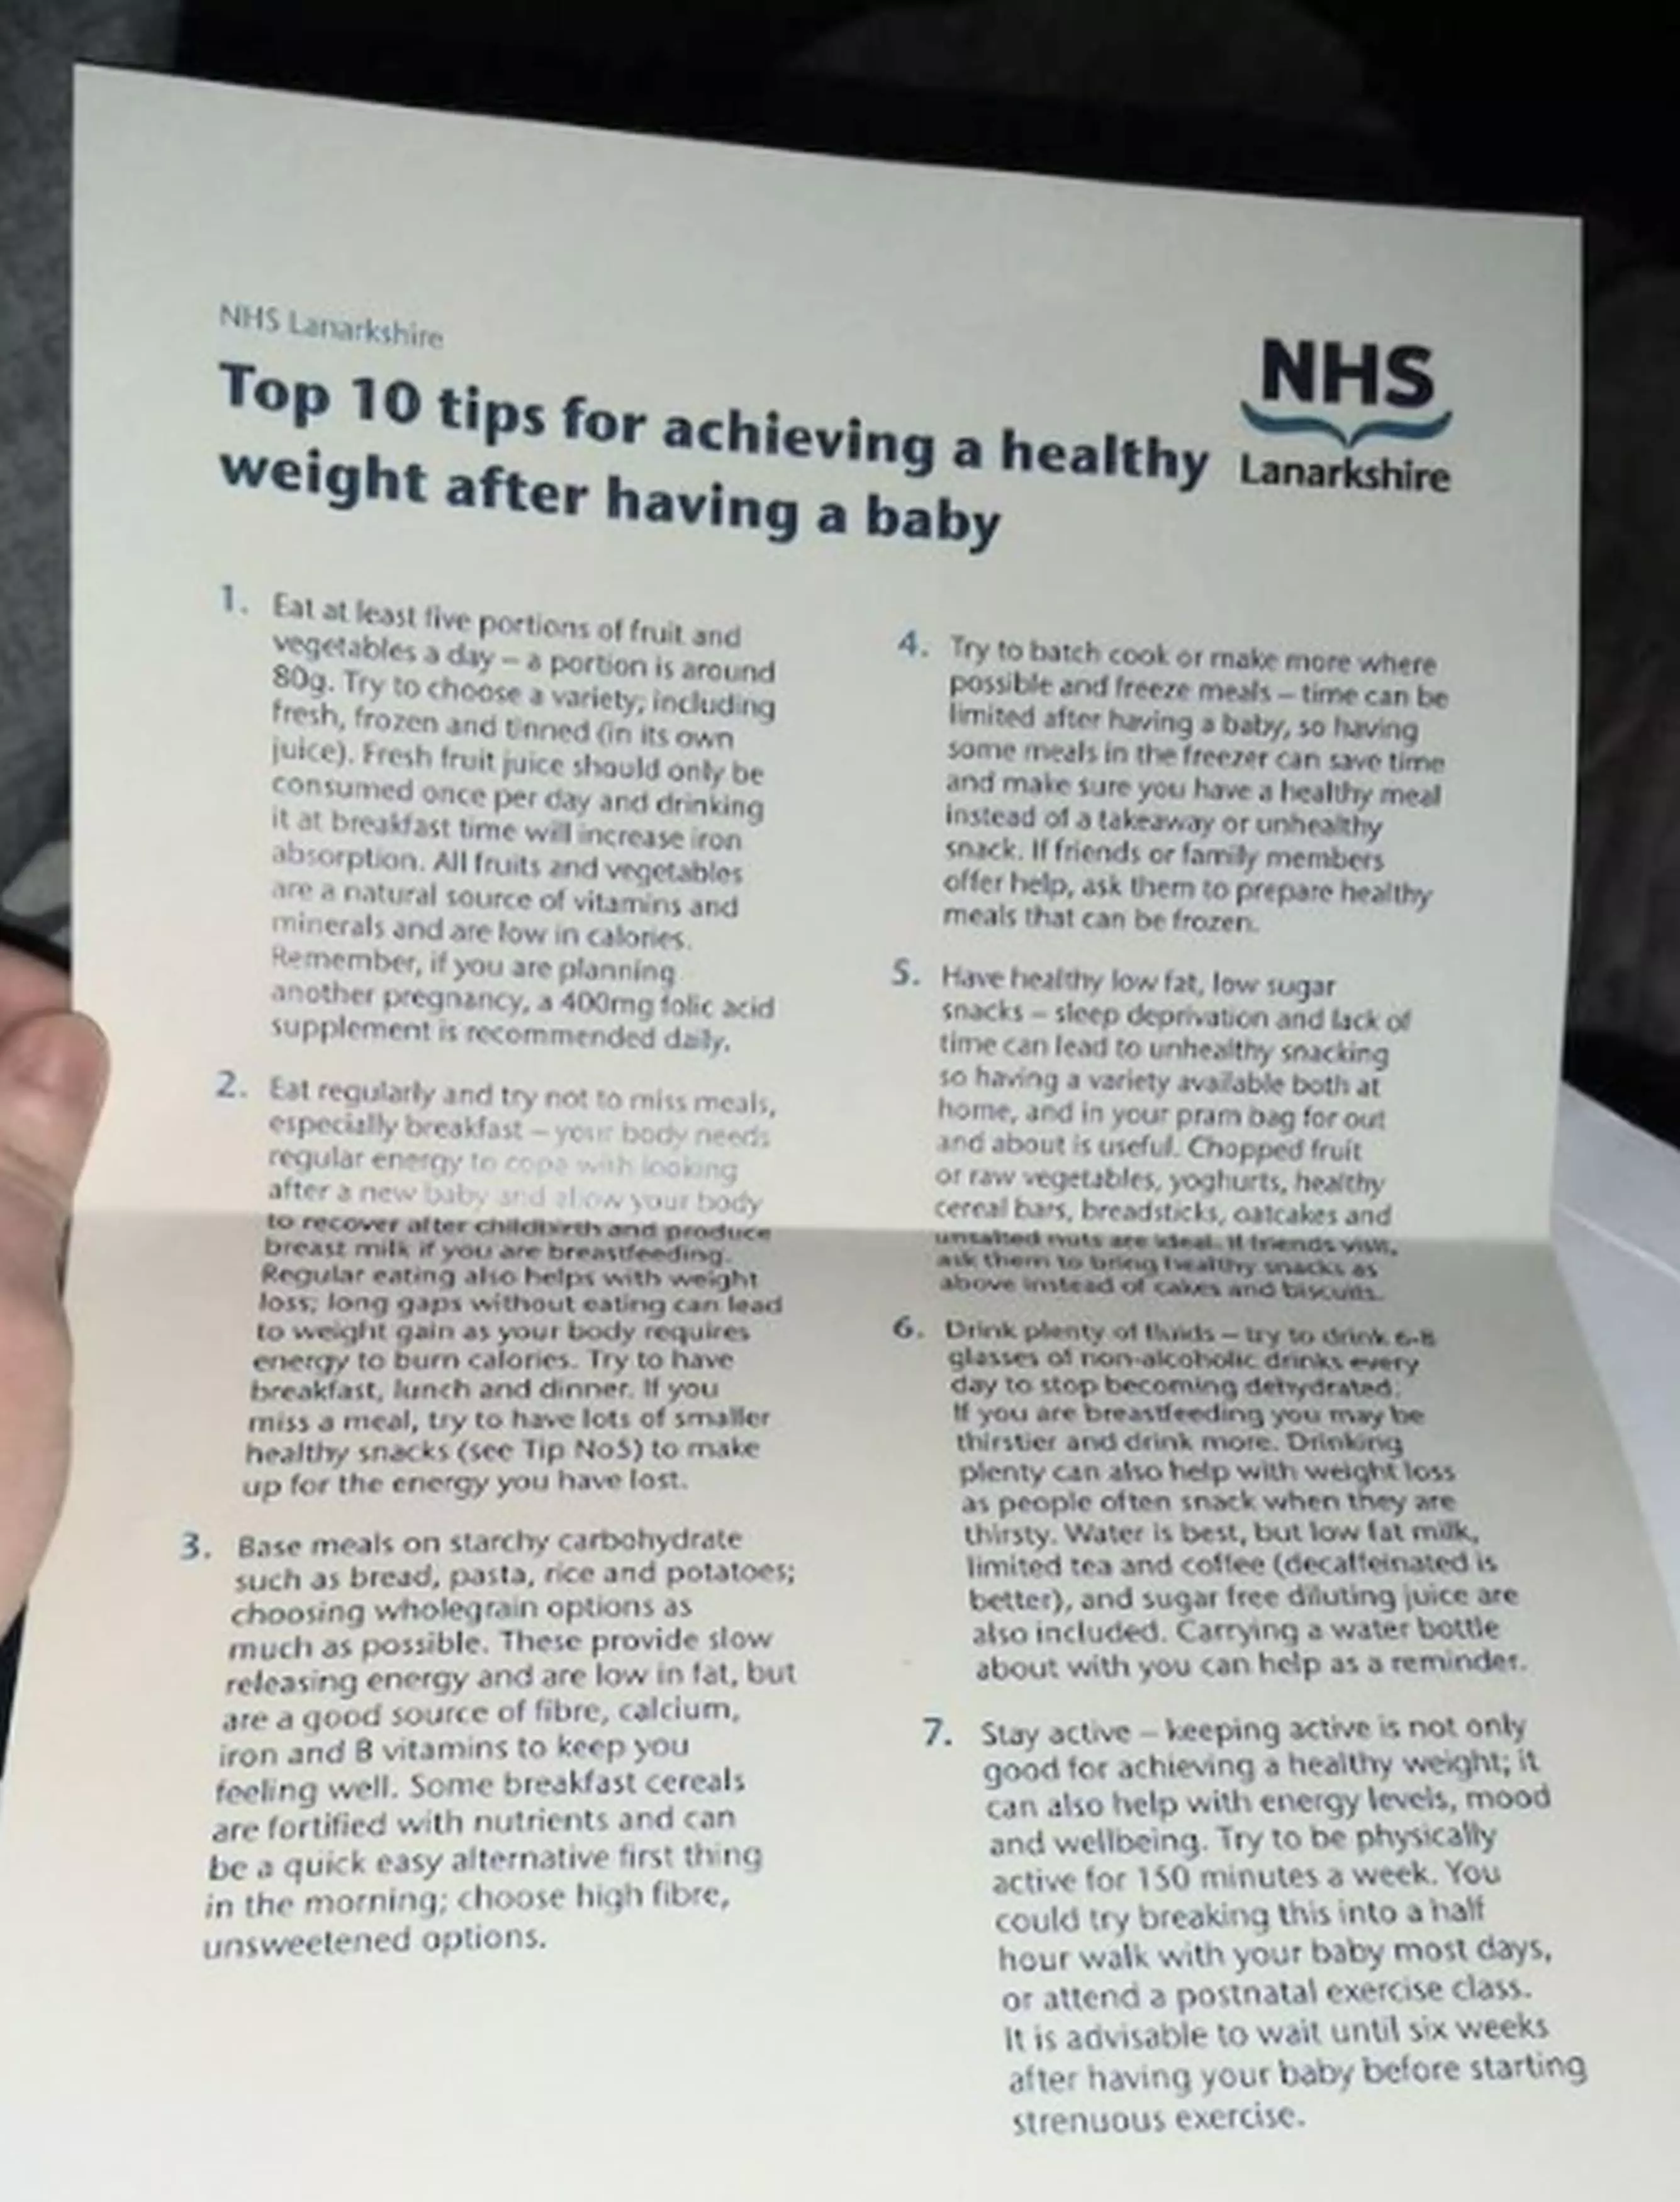 The NHS leaflet was titled 'top 10 tips for achieving a healthy weight after having a baby' (